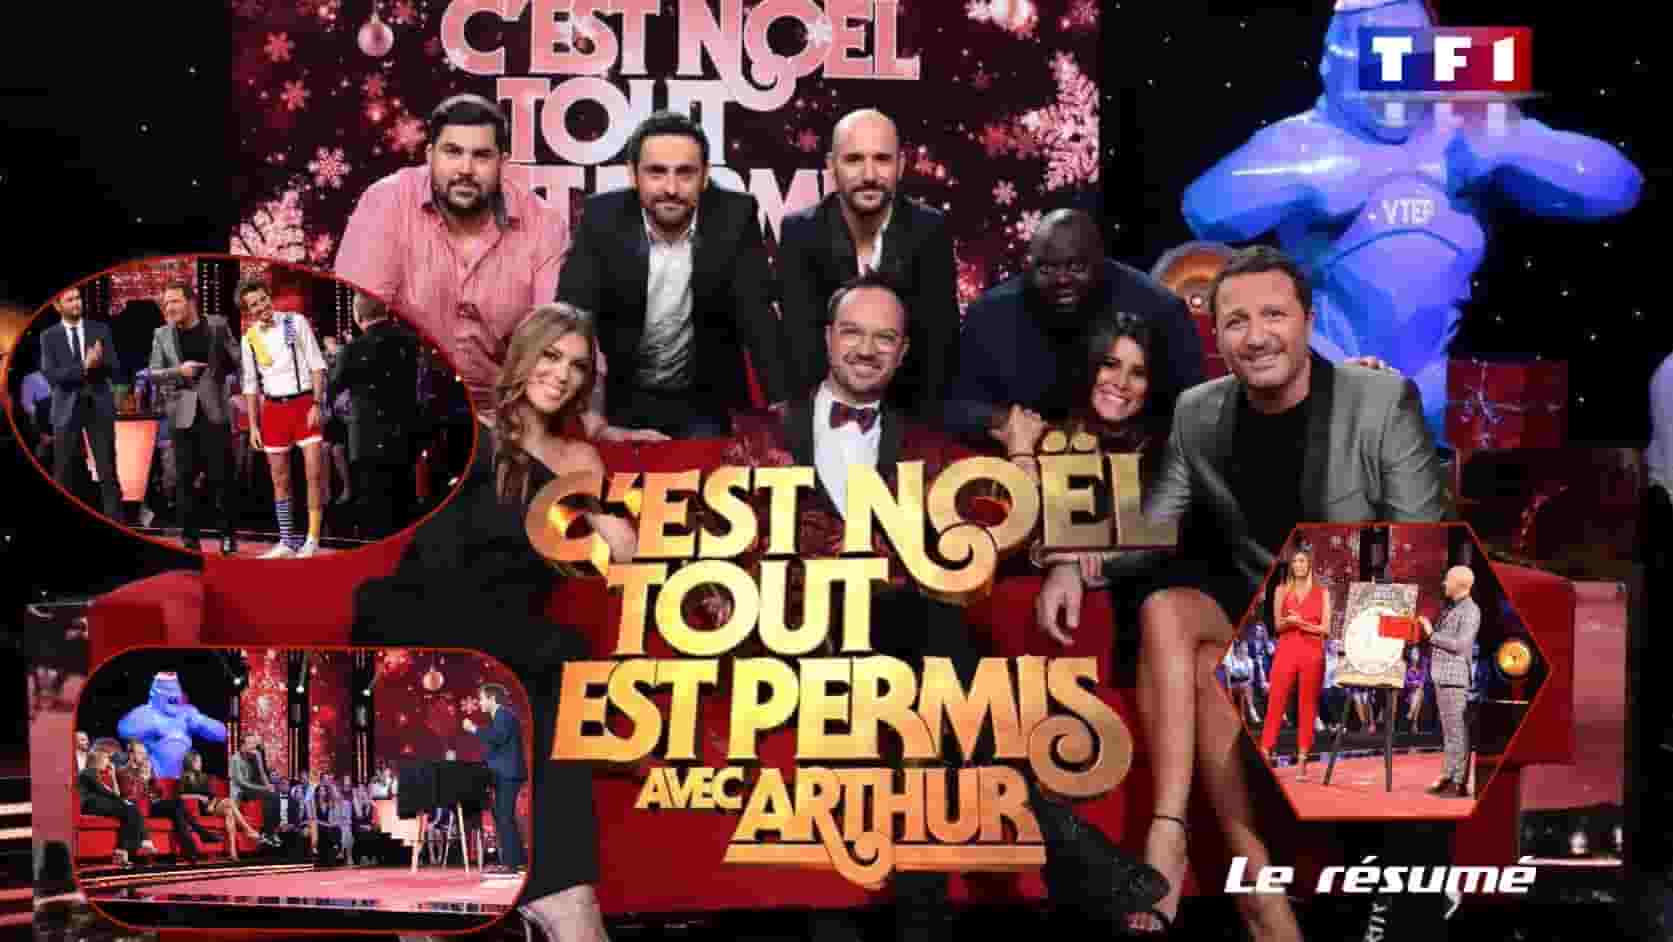 C'est Noël Tout Est Permis - ©/-\ll in One TV, All rights reserved. Do not copy. Reproduction Interdite